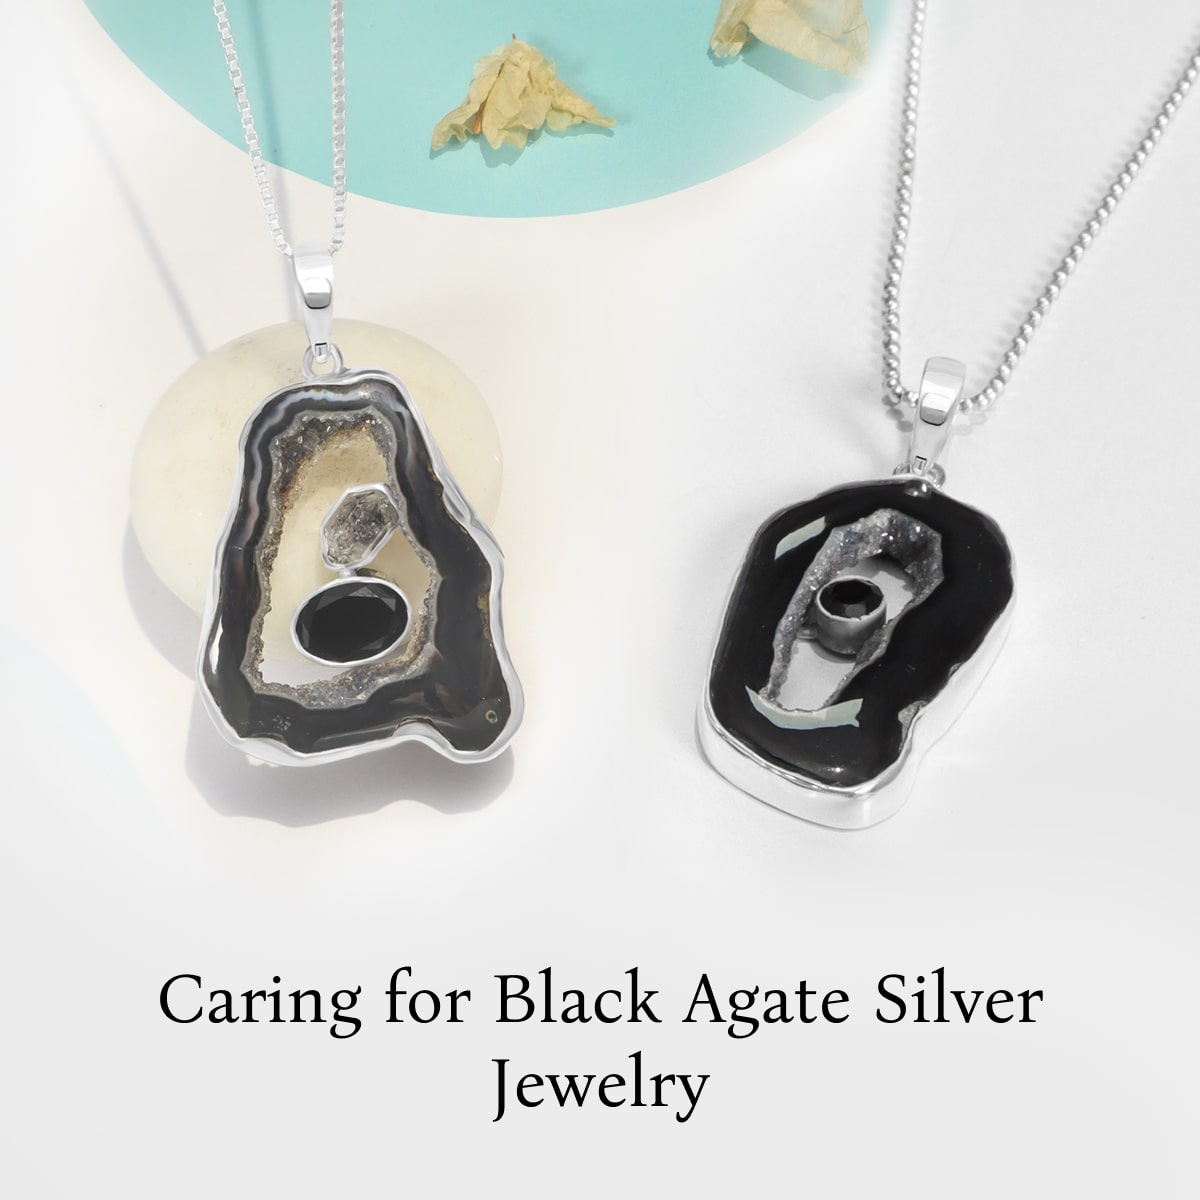 Care & Maintenance of Black Agate Sterling Silver Jewelry